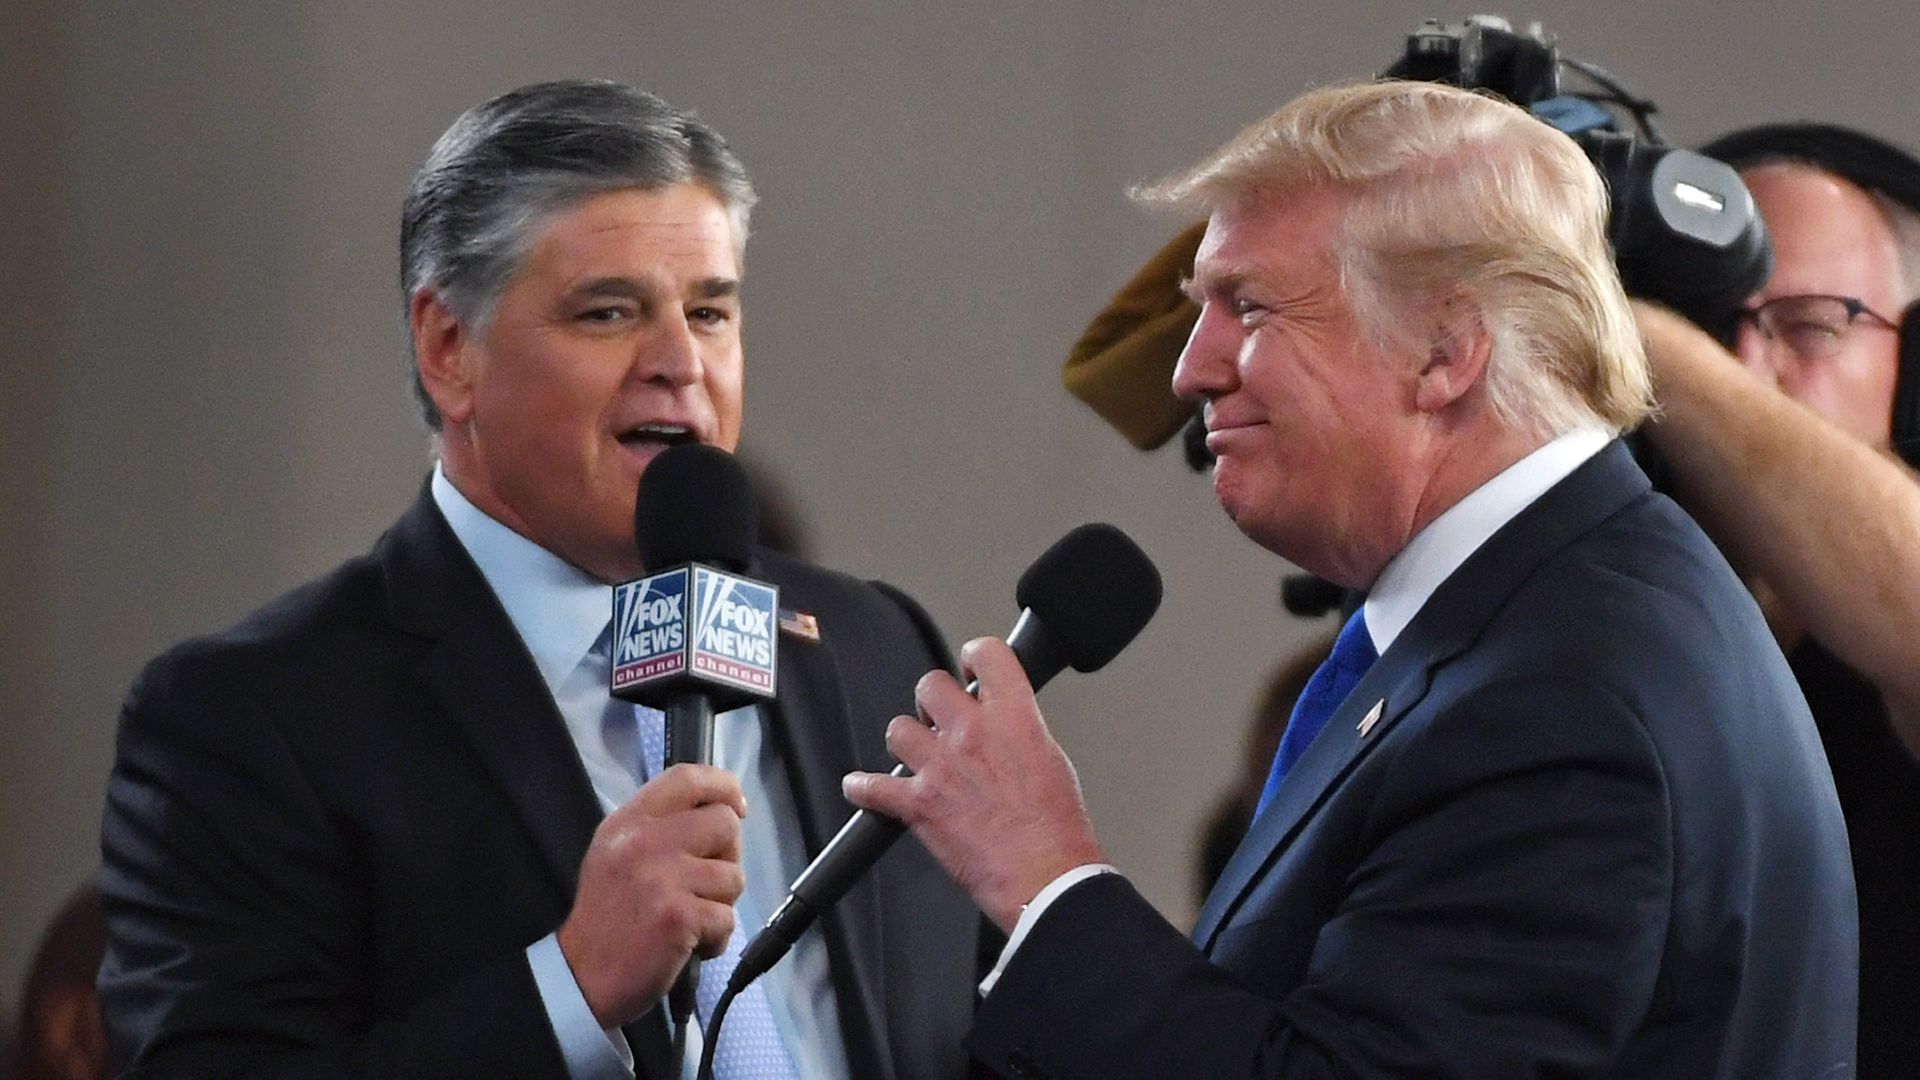 Photo of Sean Hannity and Donald Trump speaking into microphones in conversation